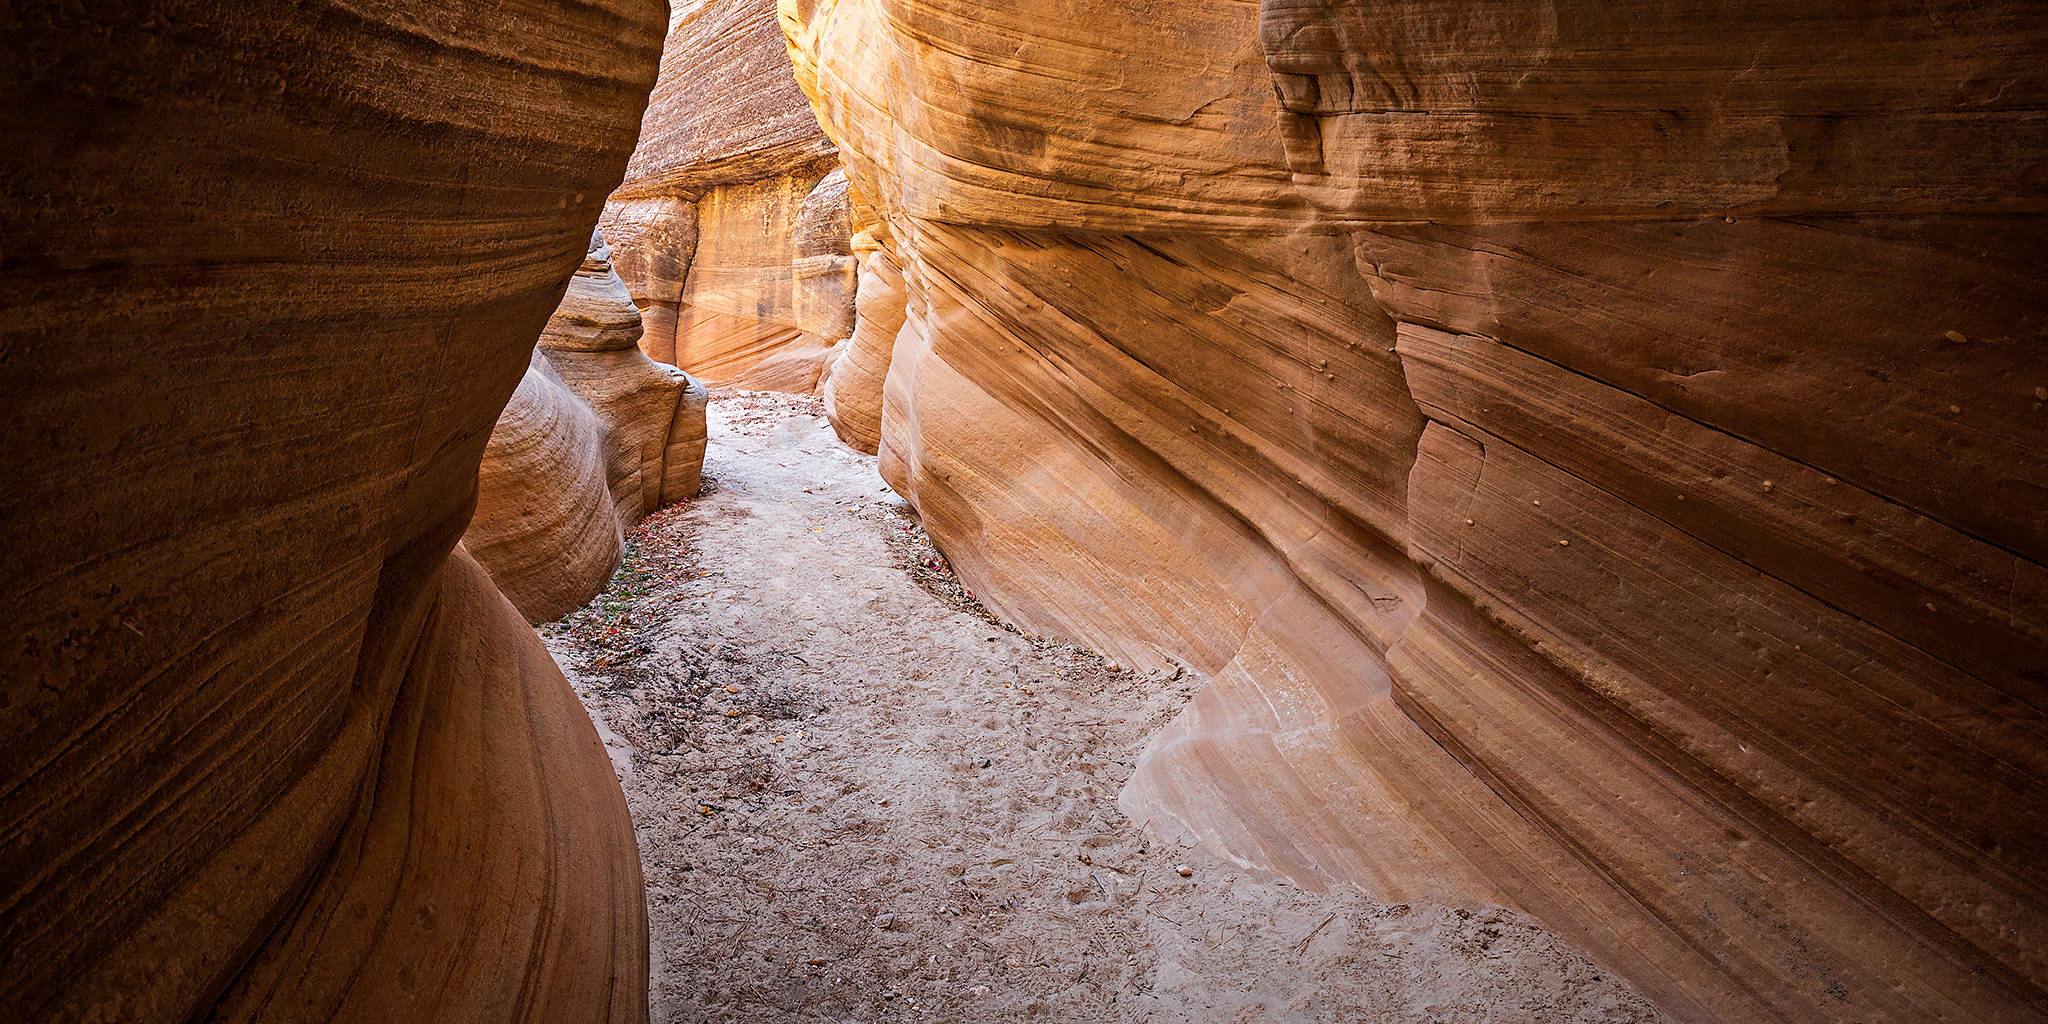 Canyons of the Paria: Lick Wash to Park Wash